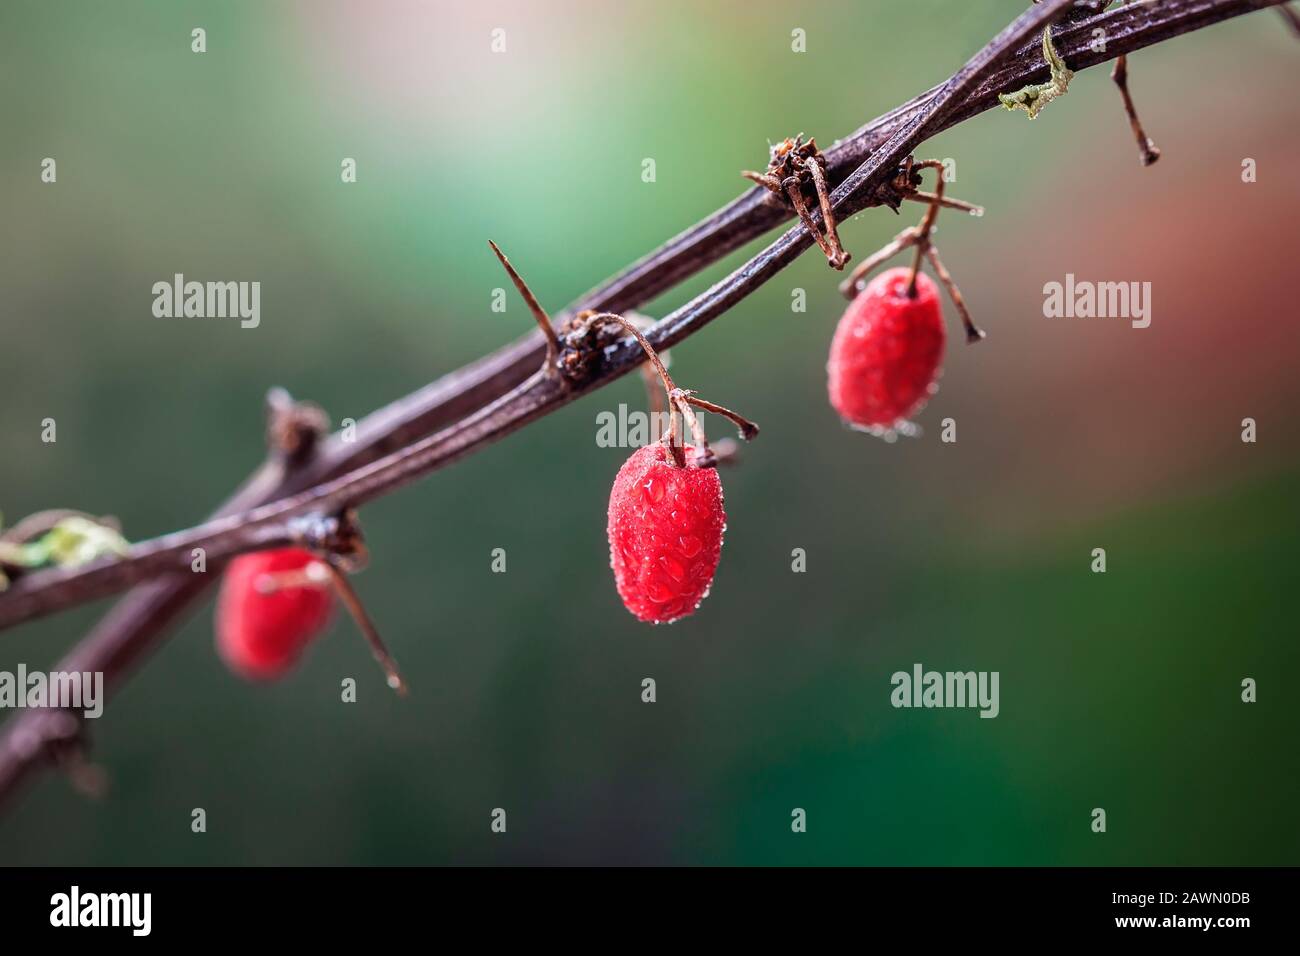 Natural abstract background of a branch with red berries in dew on a green backdrop Stock Photo